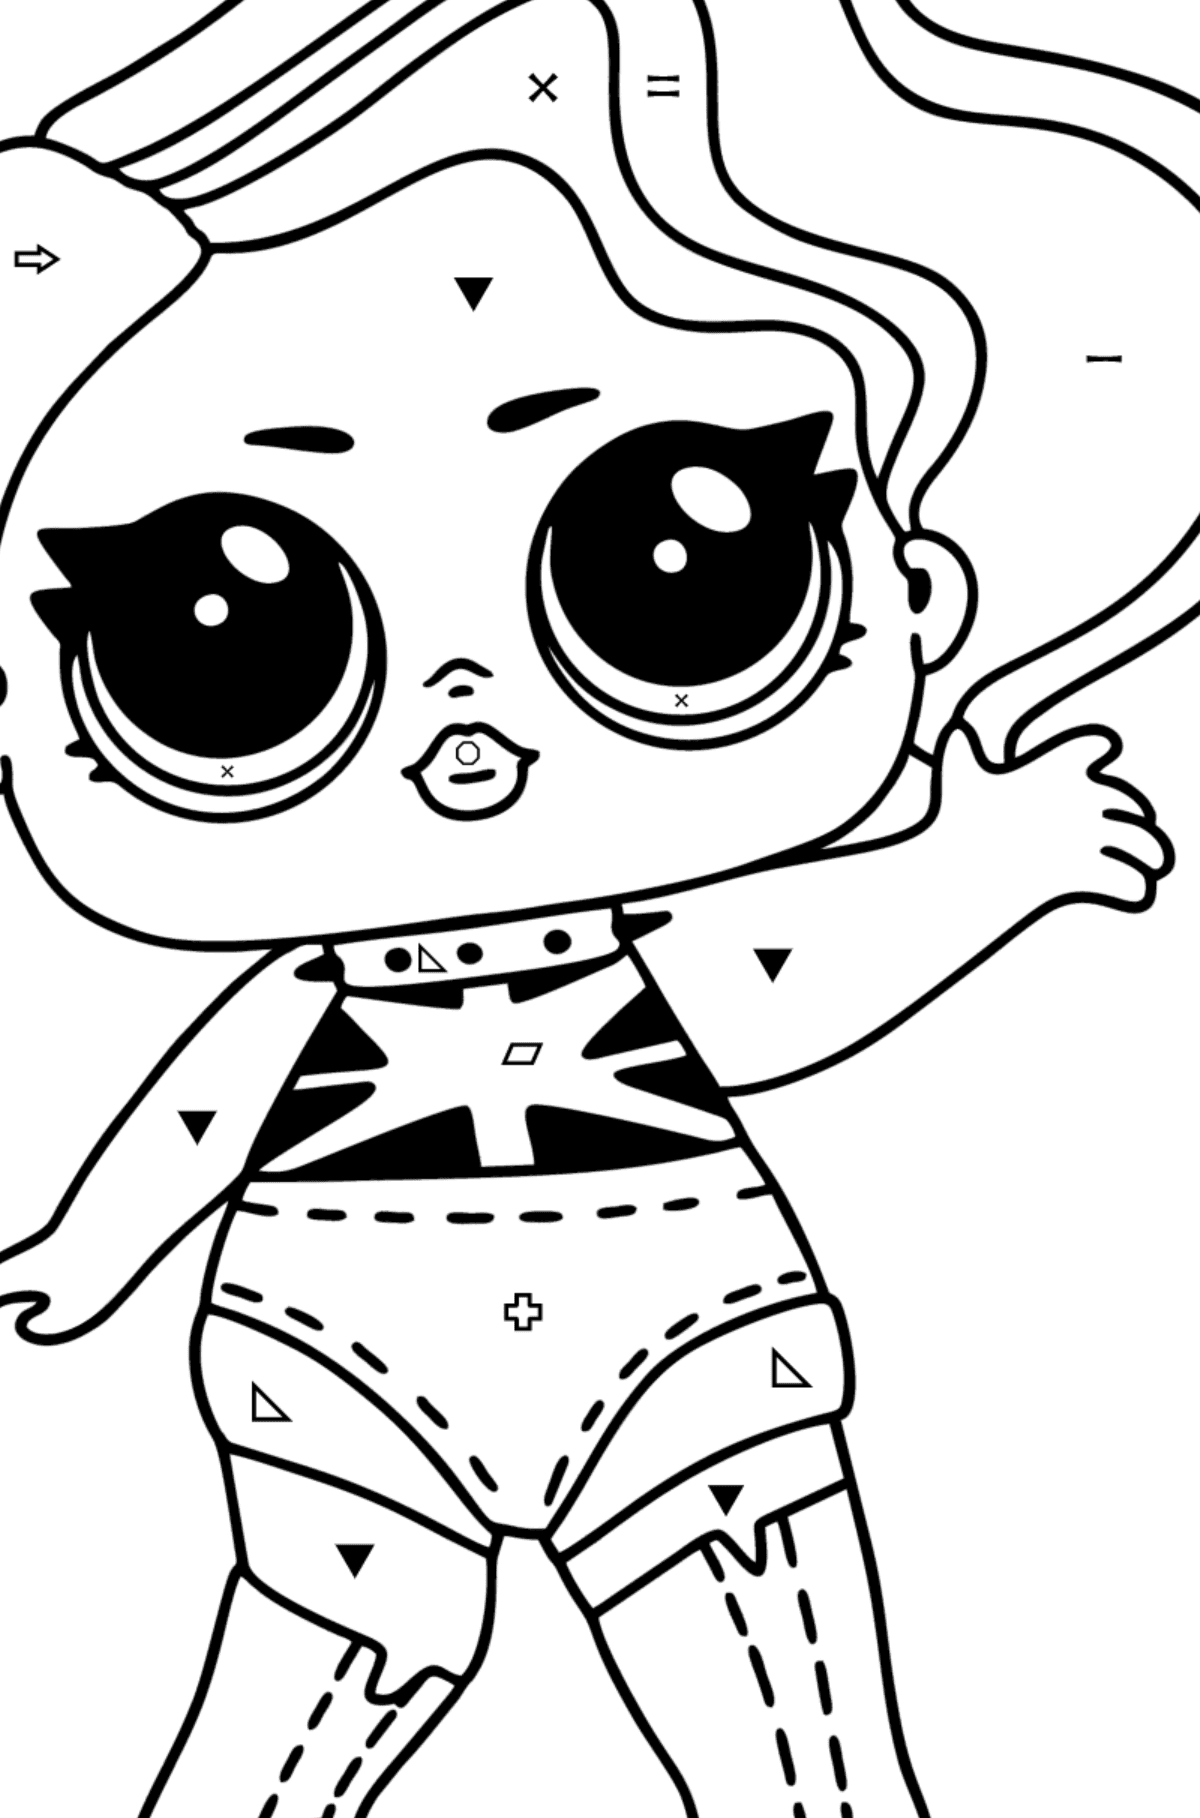 LOL Surprise Cheeky babe coloring page - Coloring by Symbols and Geometric Shapes for Kids